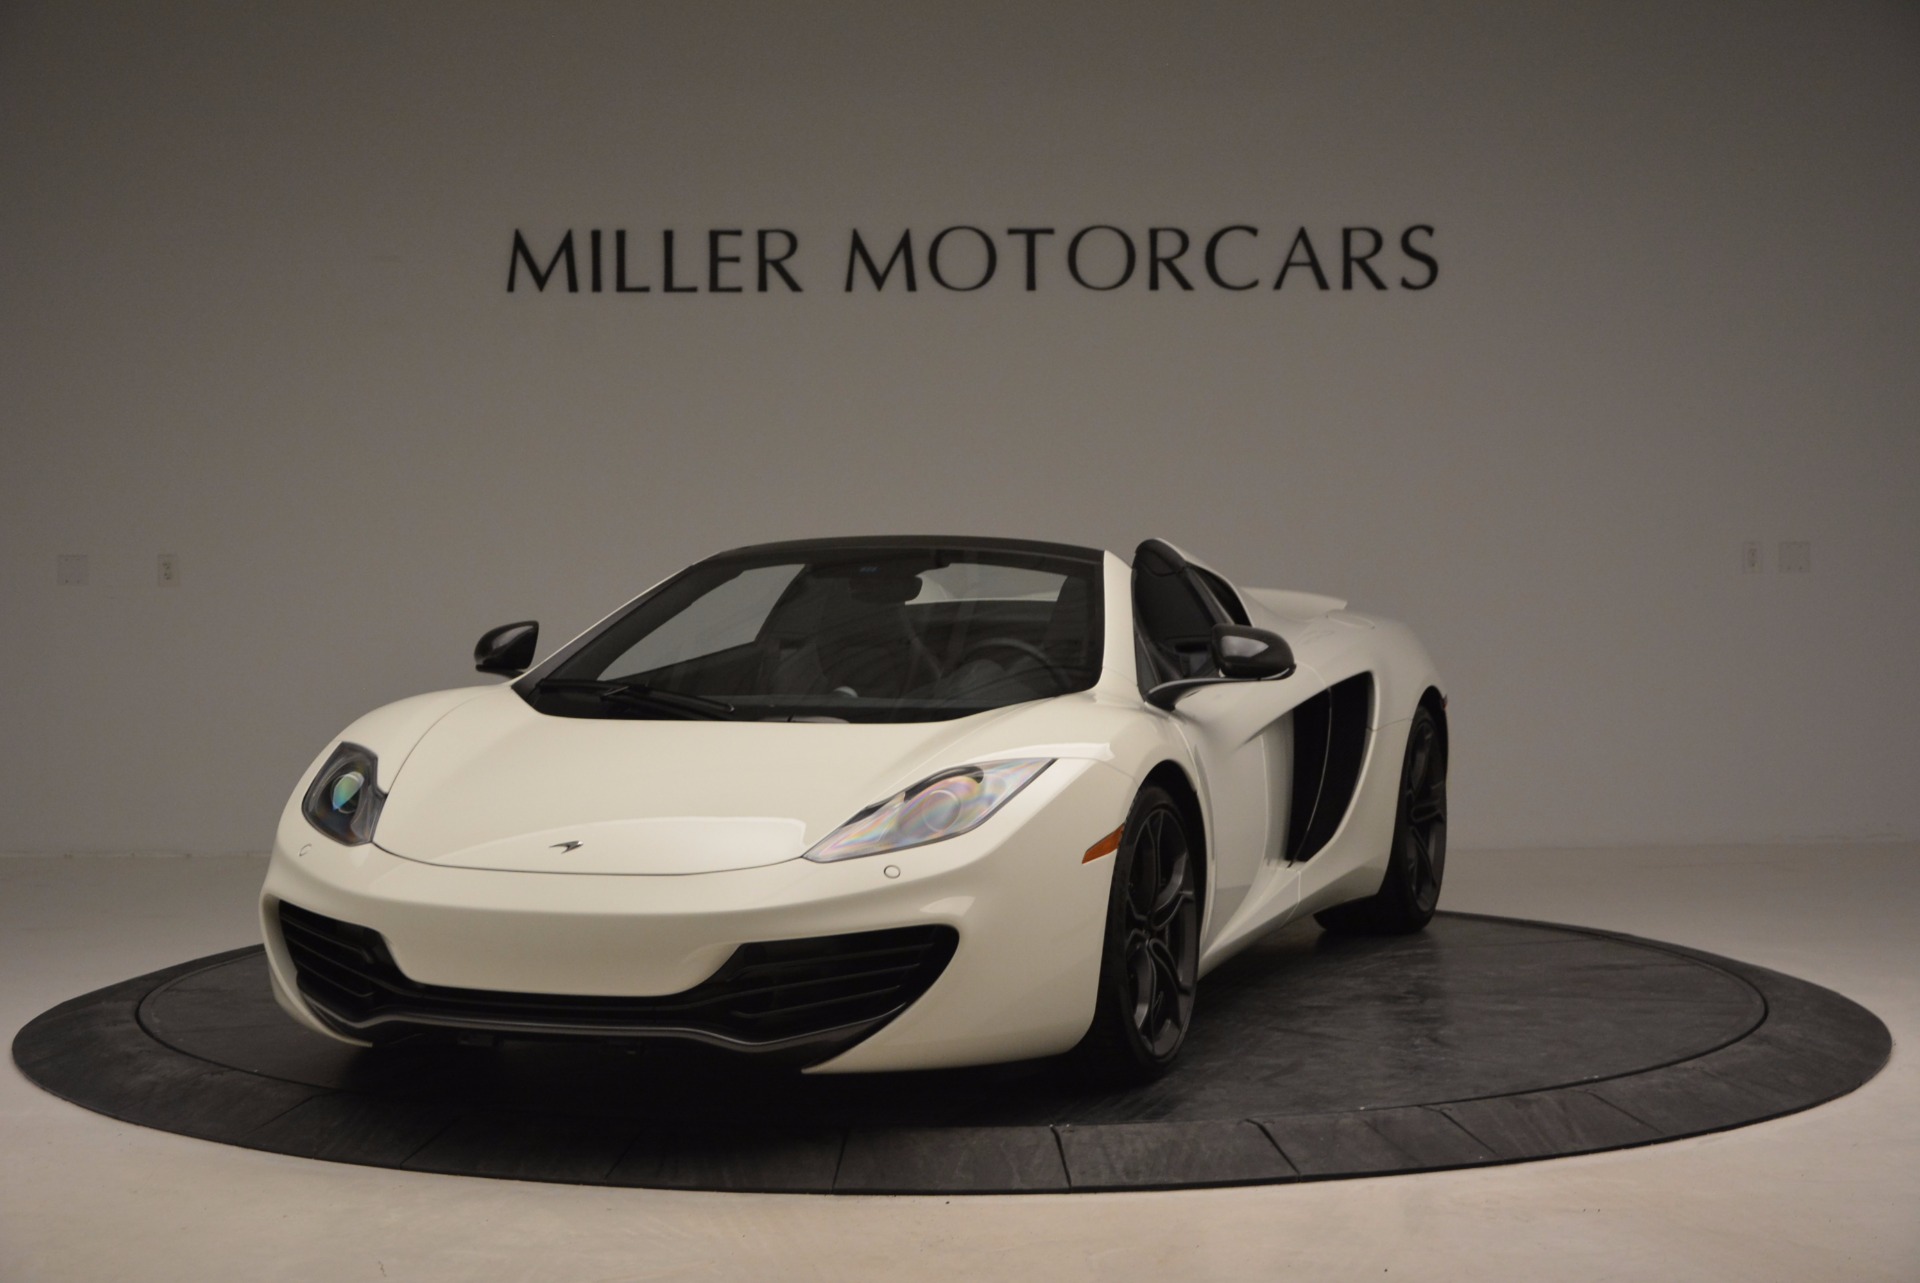 Used 2014 McLaren MP4-12C Spider for sale Sold at Pagani of Greenwich in Greenwich CT 06830 1